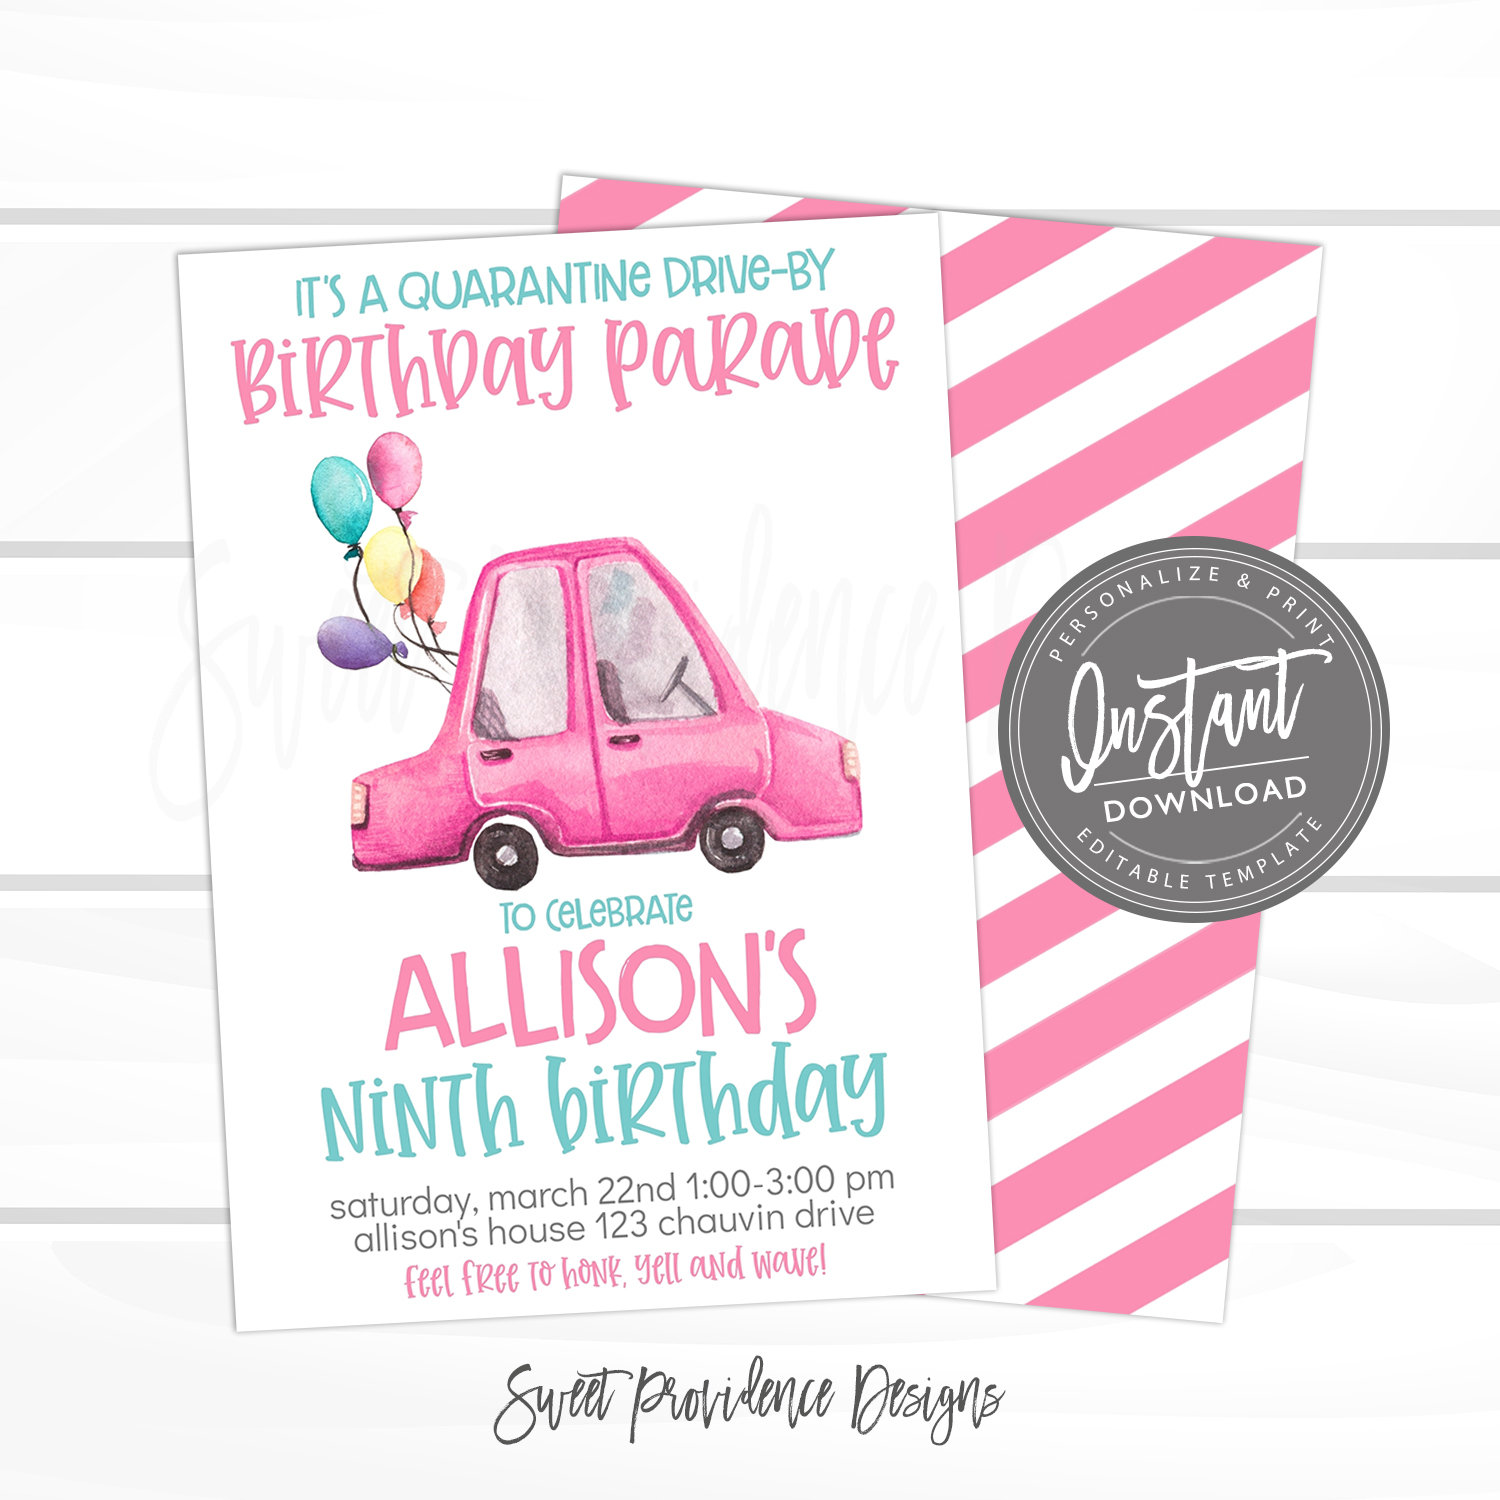 drive-by-birthday-parade-invitation-sweet-providence-designs